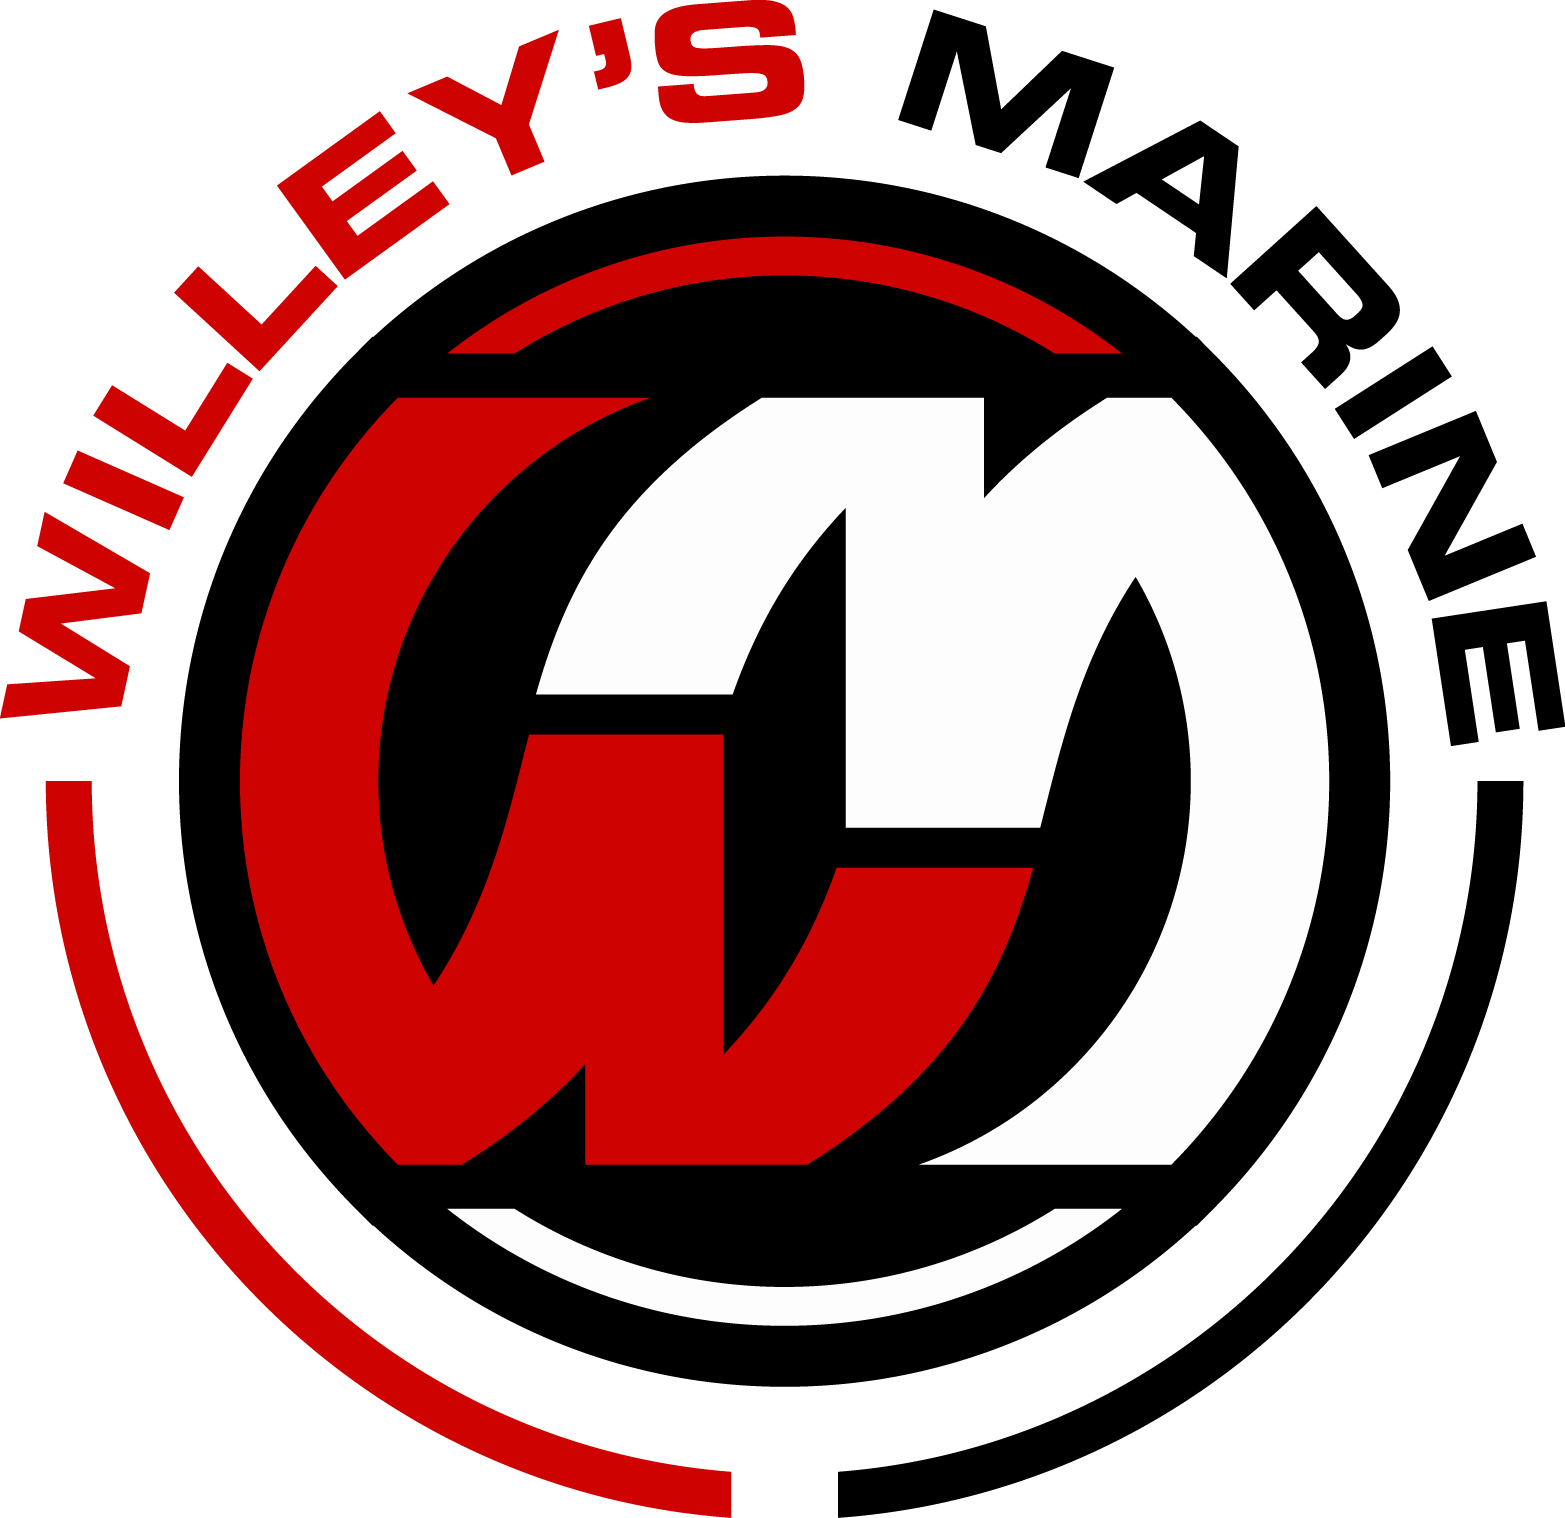 Company logo for 'Willey's Marine - McGregor'.